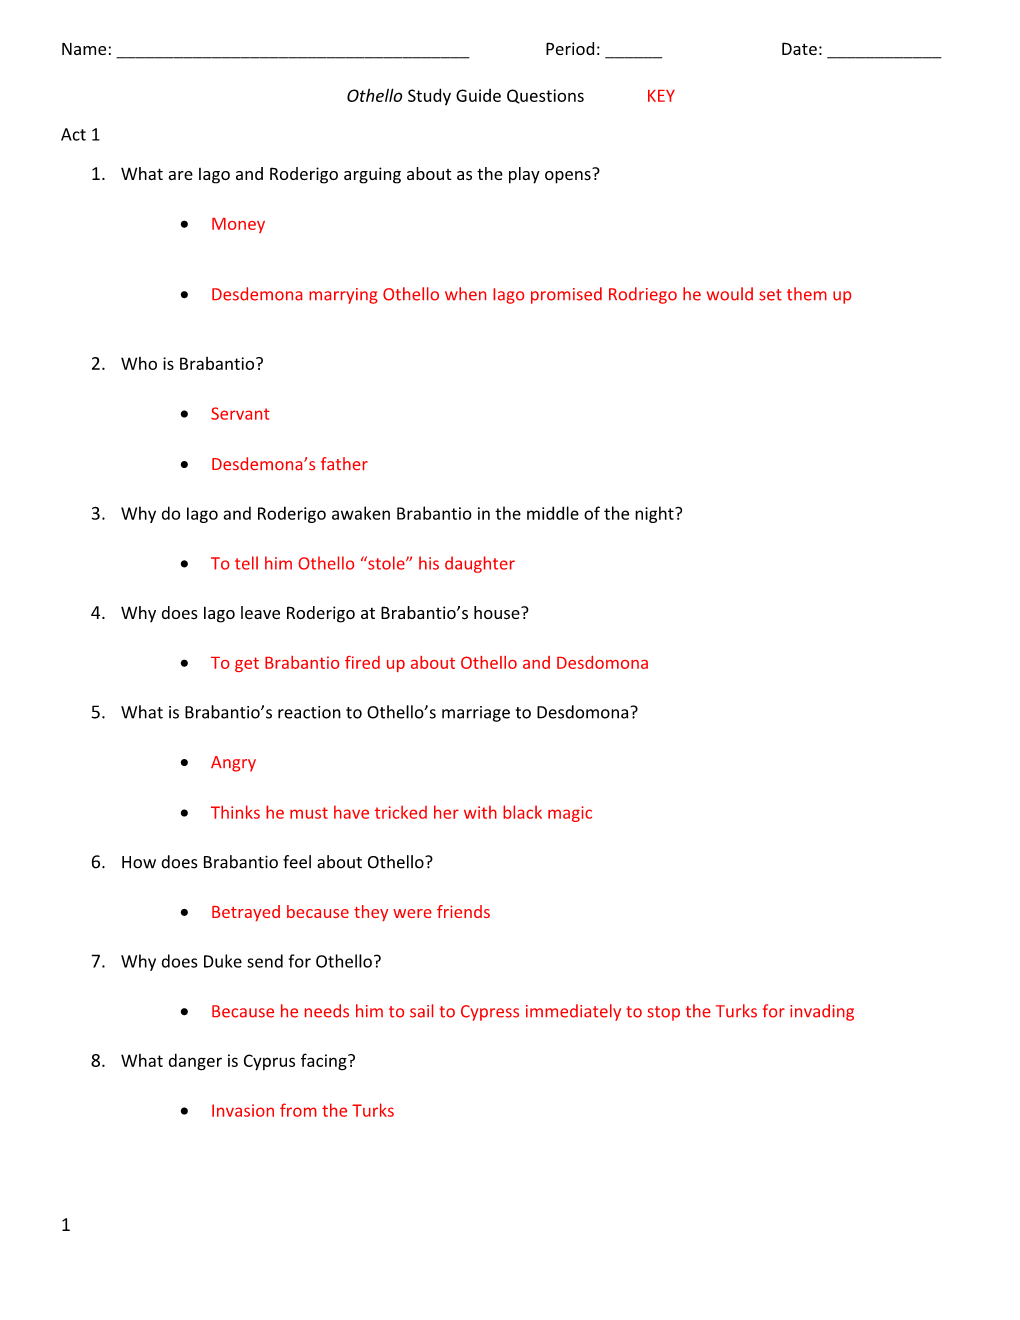 Othello Study Guide Questionskey